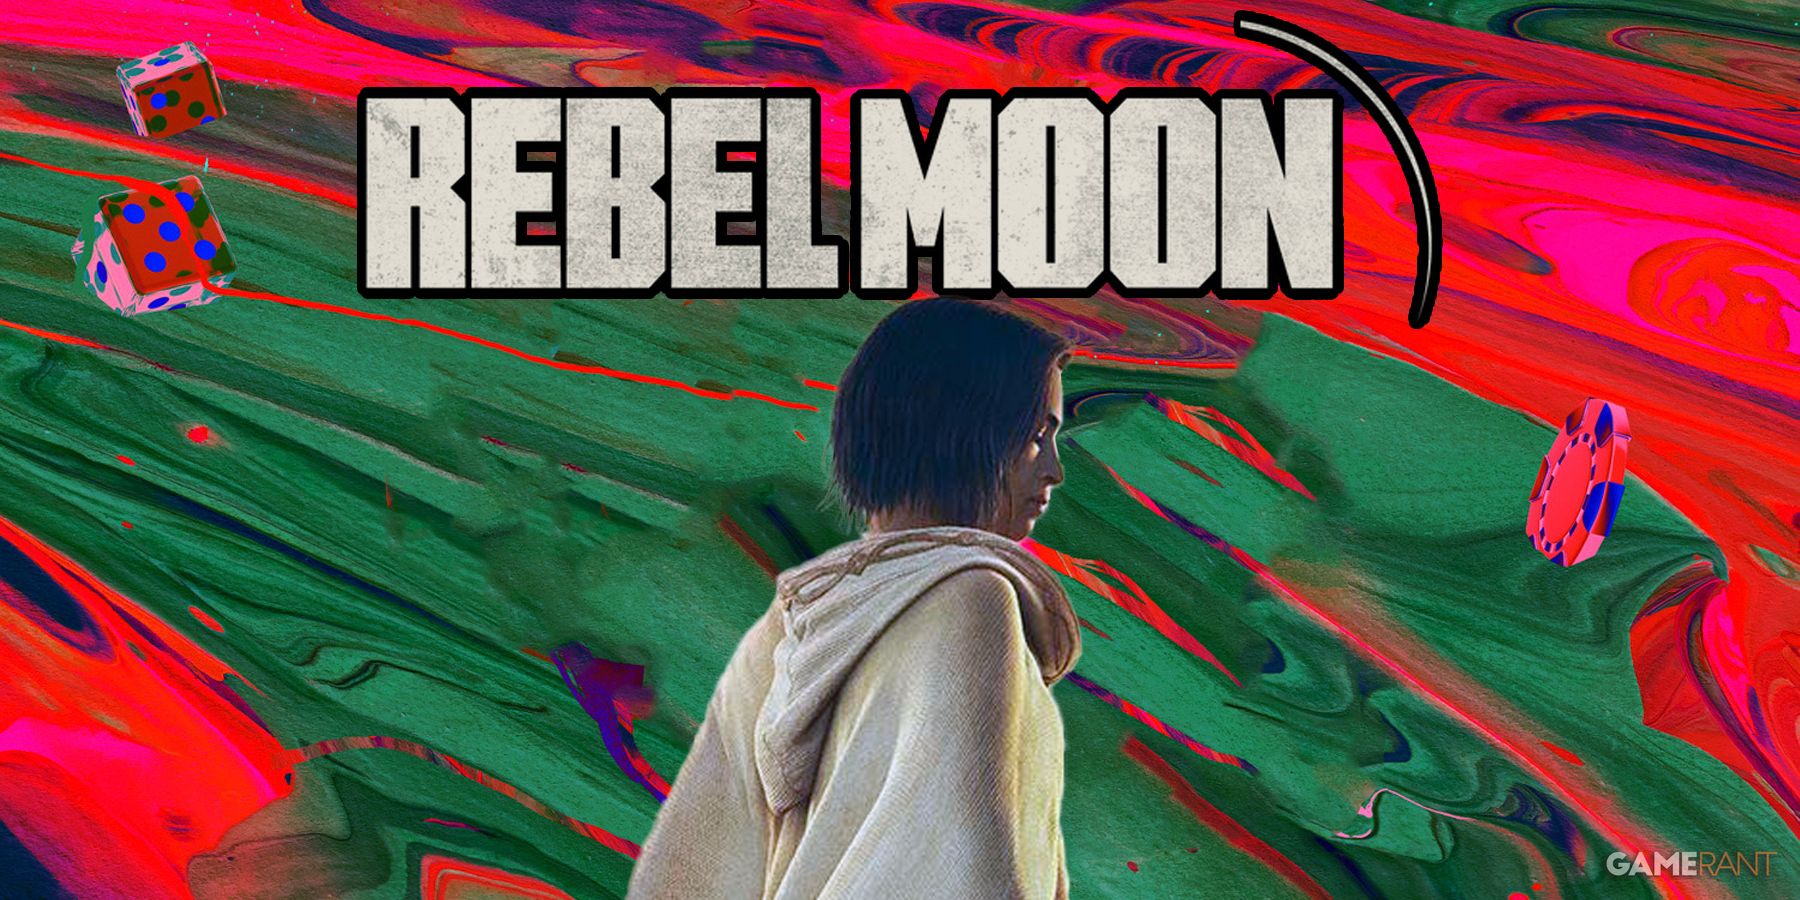 Zack Snyder Rebel Moon But in A Better Anime Style #meboom #anime